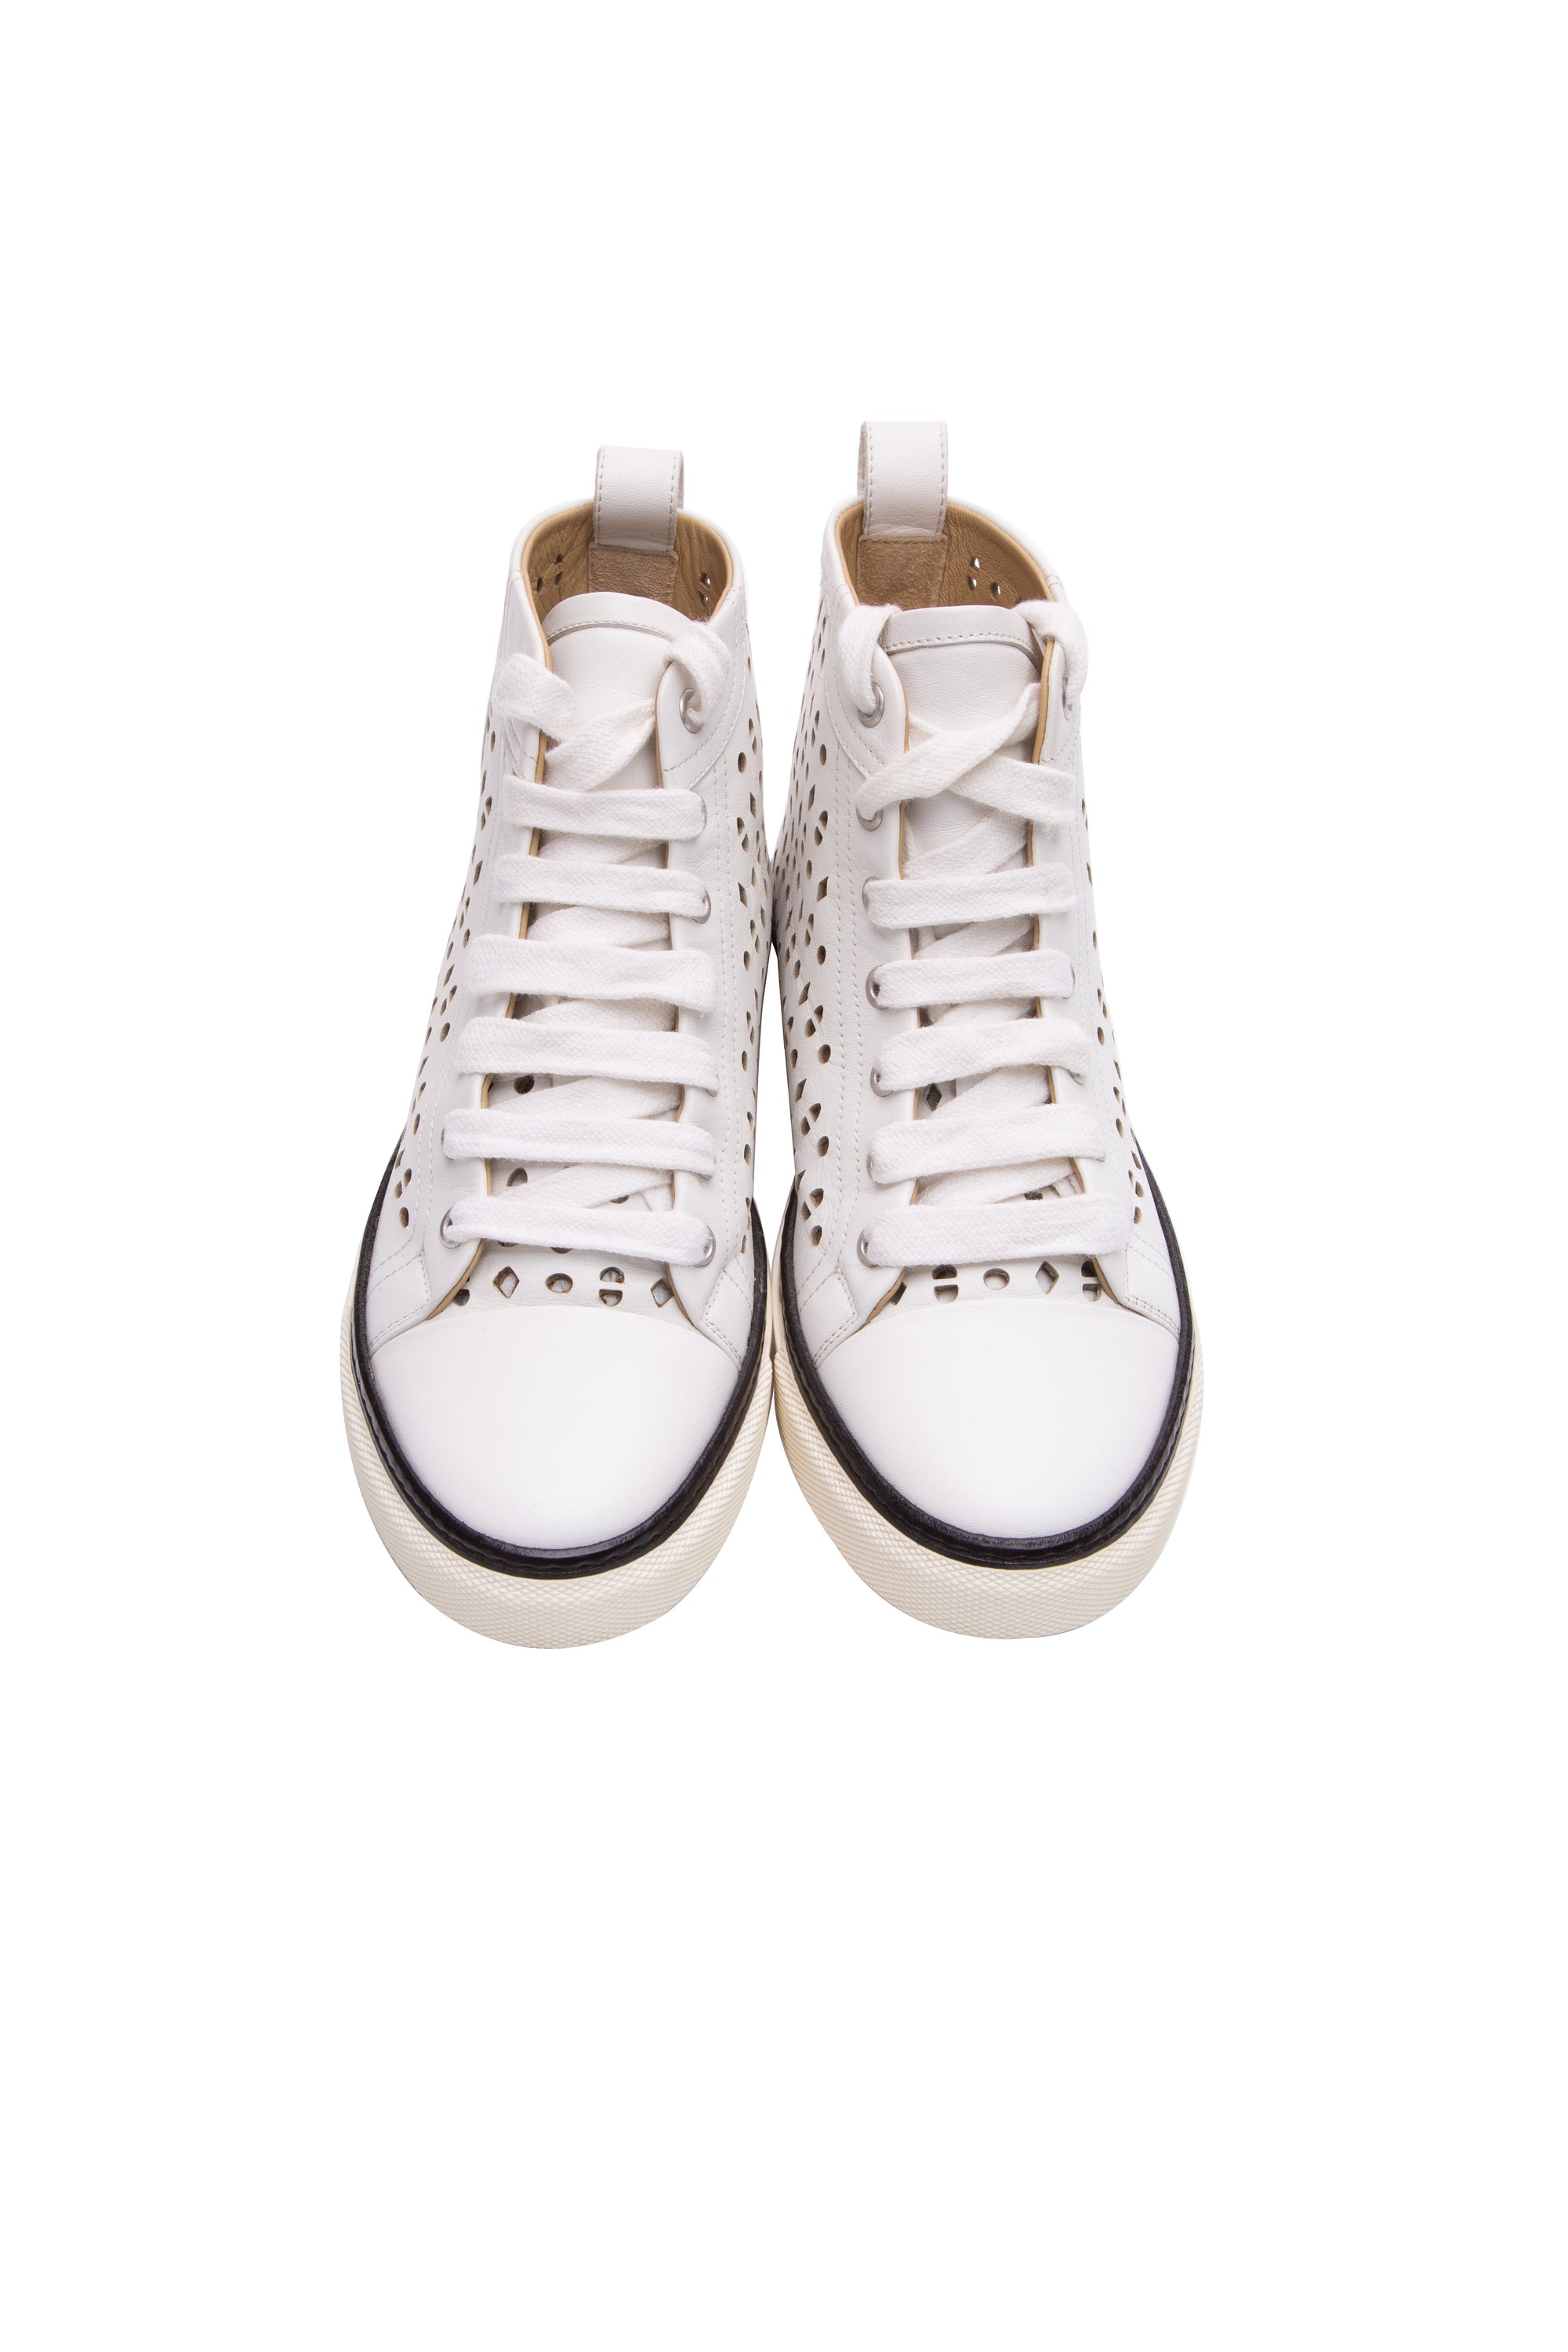  Hermes Perforated Jimmy High Top Sneakers - Size 36